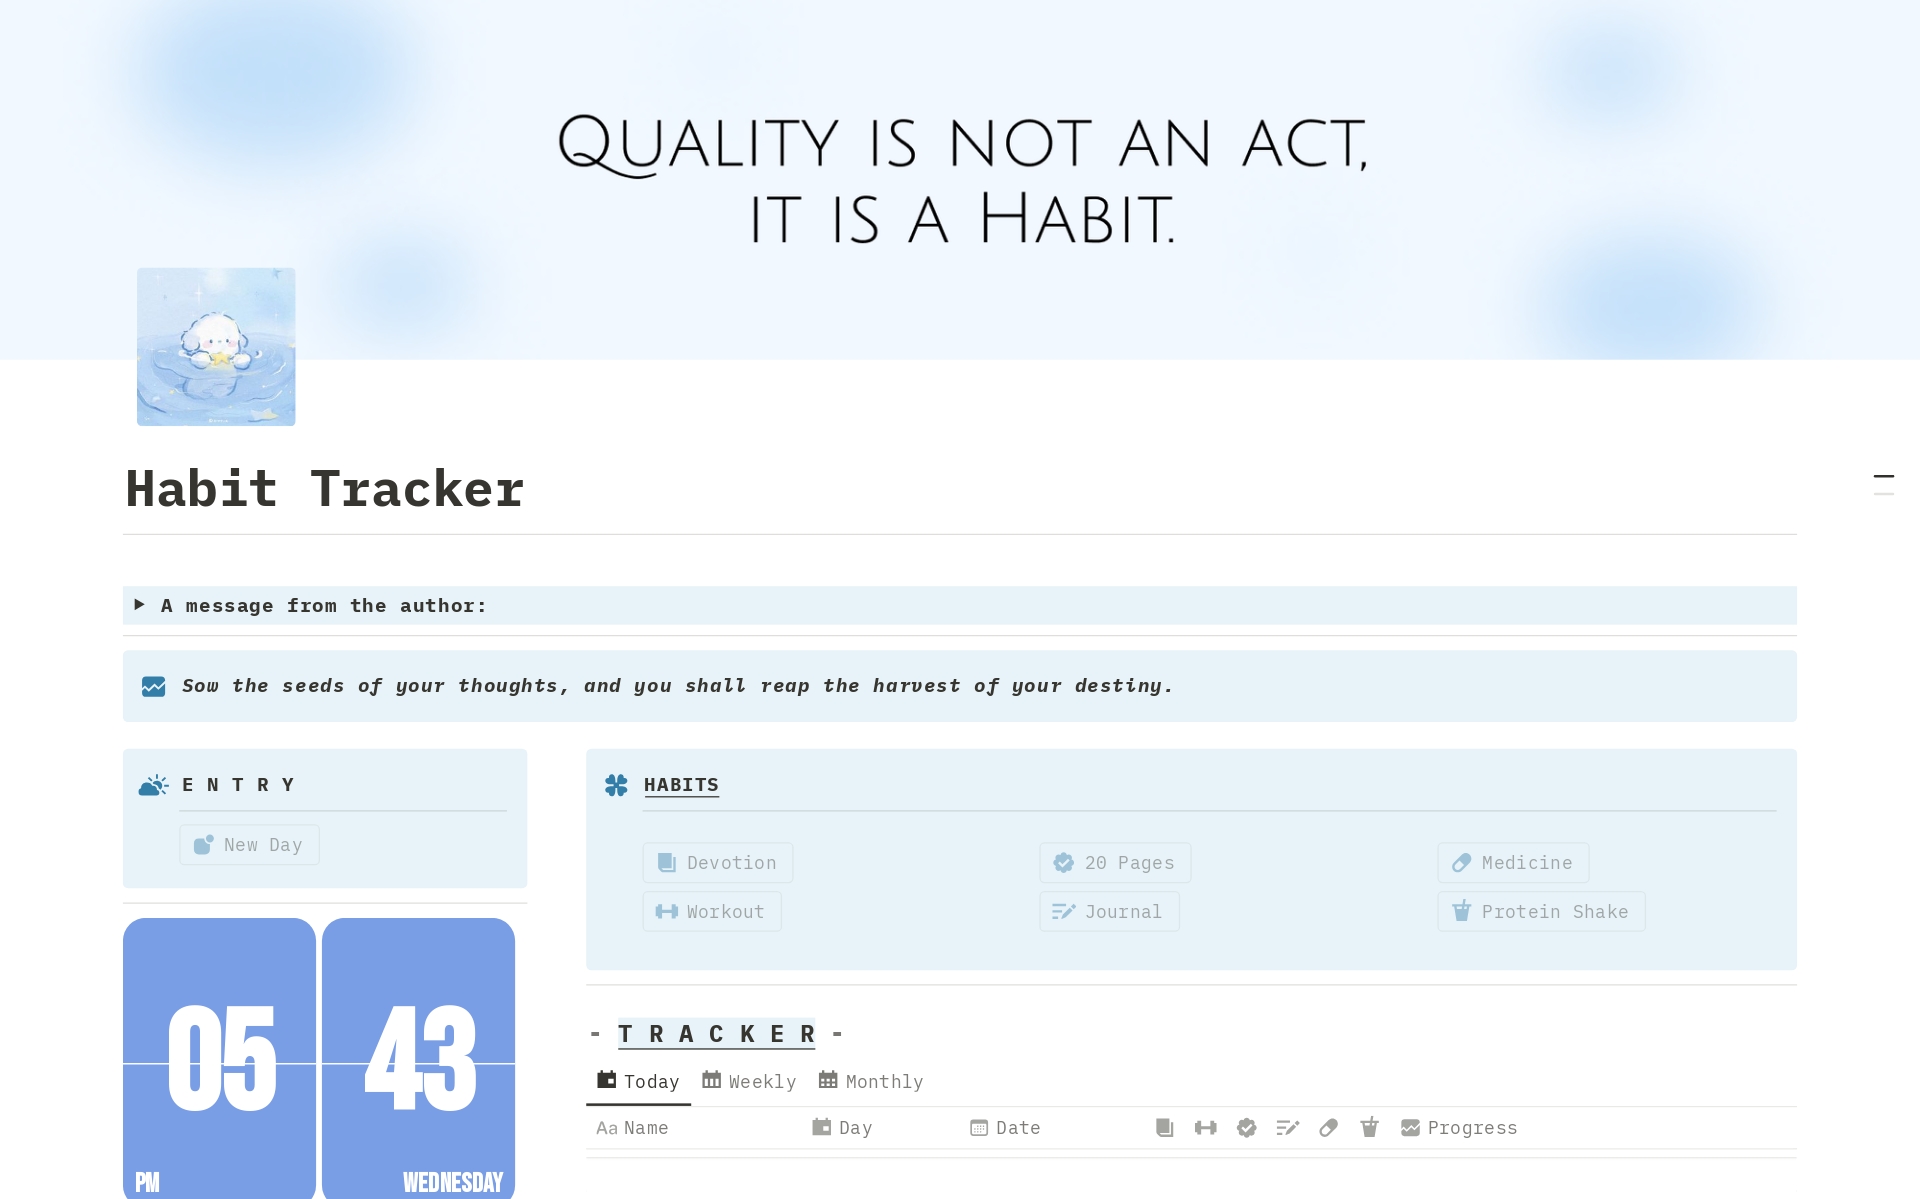 Track your habits and stay on track with this easy-to-use and customizable Notion template.
This template includes:
A variety of pre-made habit trackers to fit your needs
The ability to customize trackers to track any habit you want
A progress tracker to see how you'r doing over 